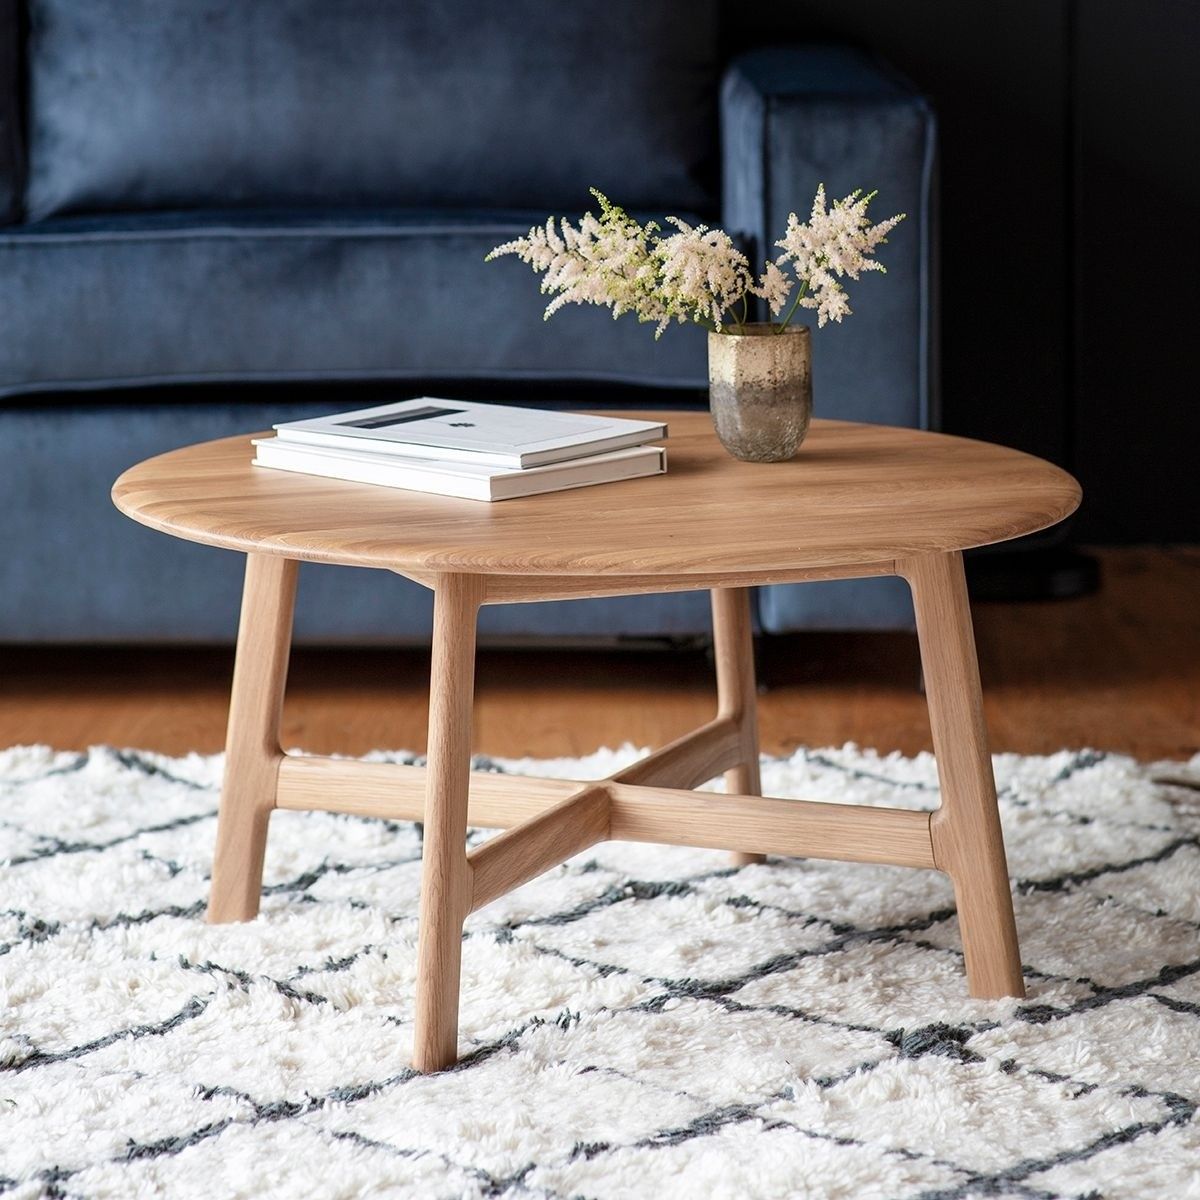 Loscombe Round Coffee Table Inside Coffee Tables With Round Wooden Tops (Gallery 8 of 20)